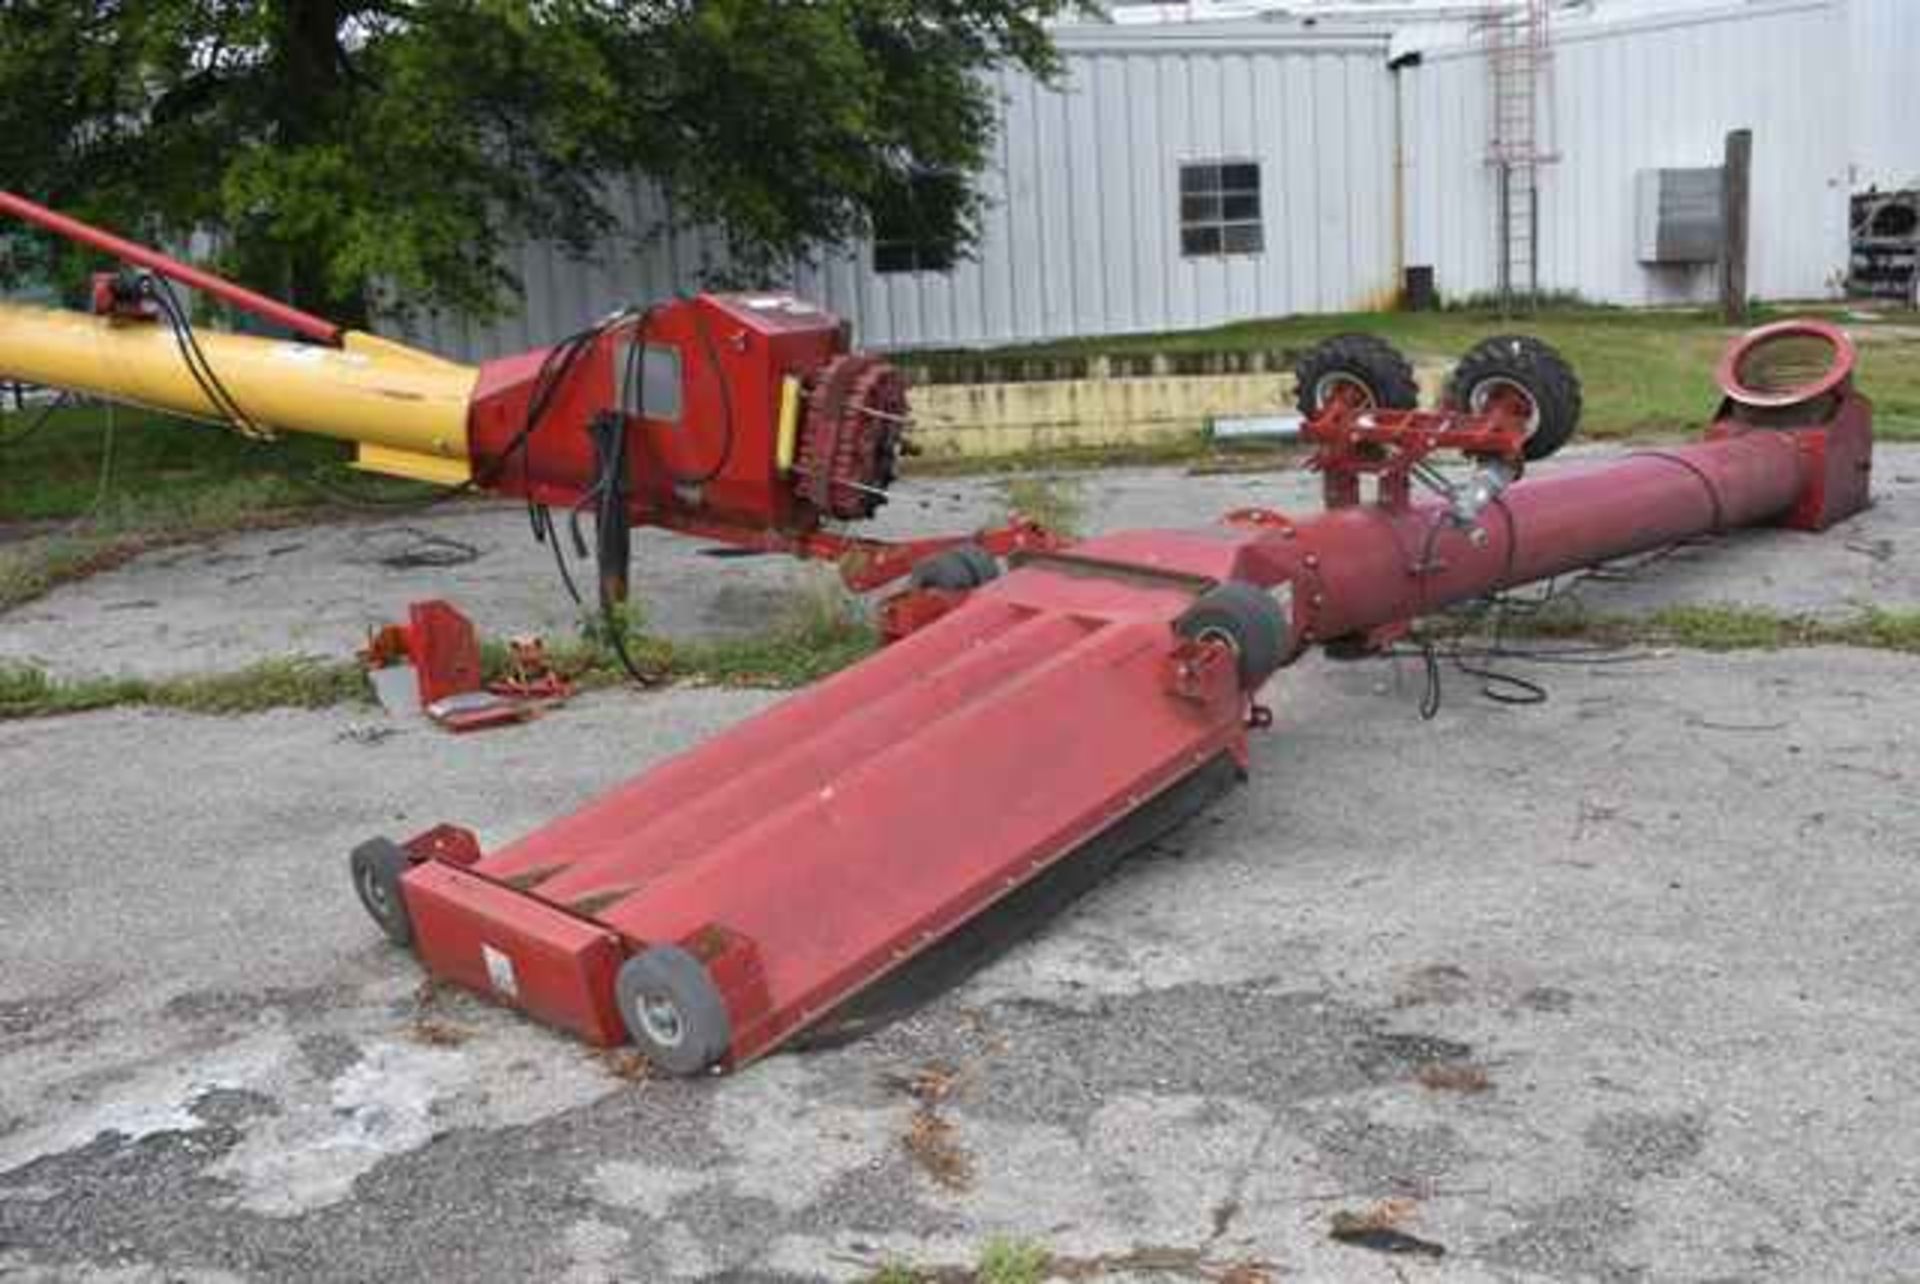 Westfield Model #MKX 160-85 Portable Screw Conveyor. CALL FOR LOADING FEES (402)657-7609 - Image 4 of 5